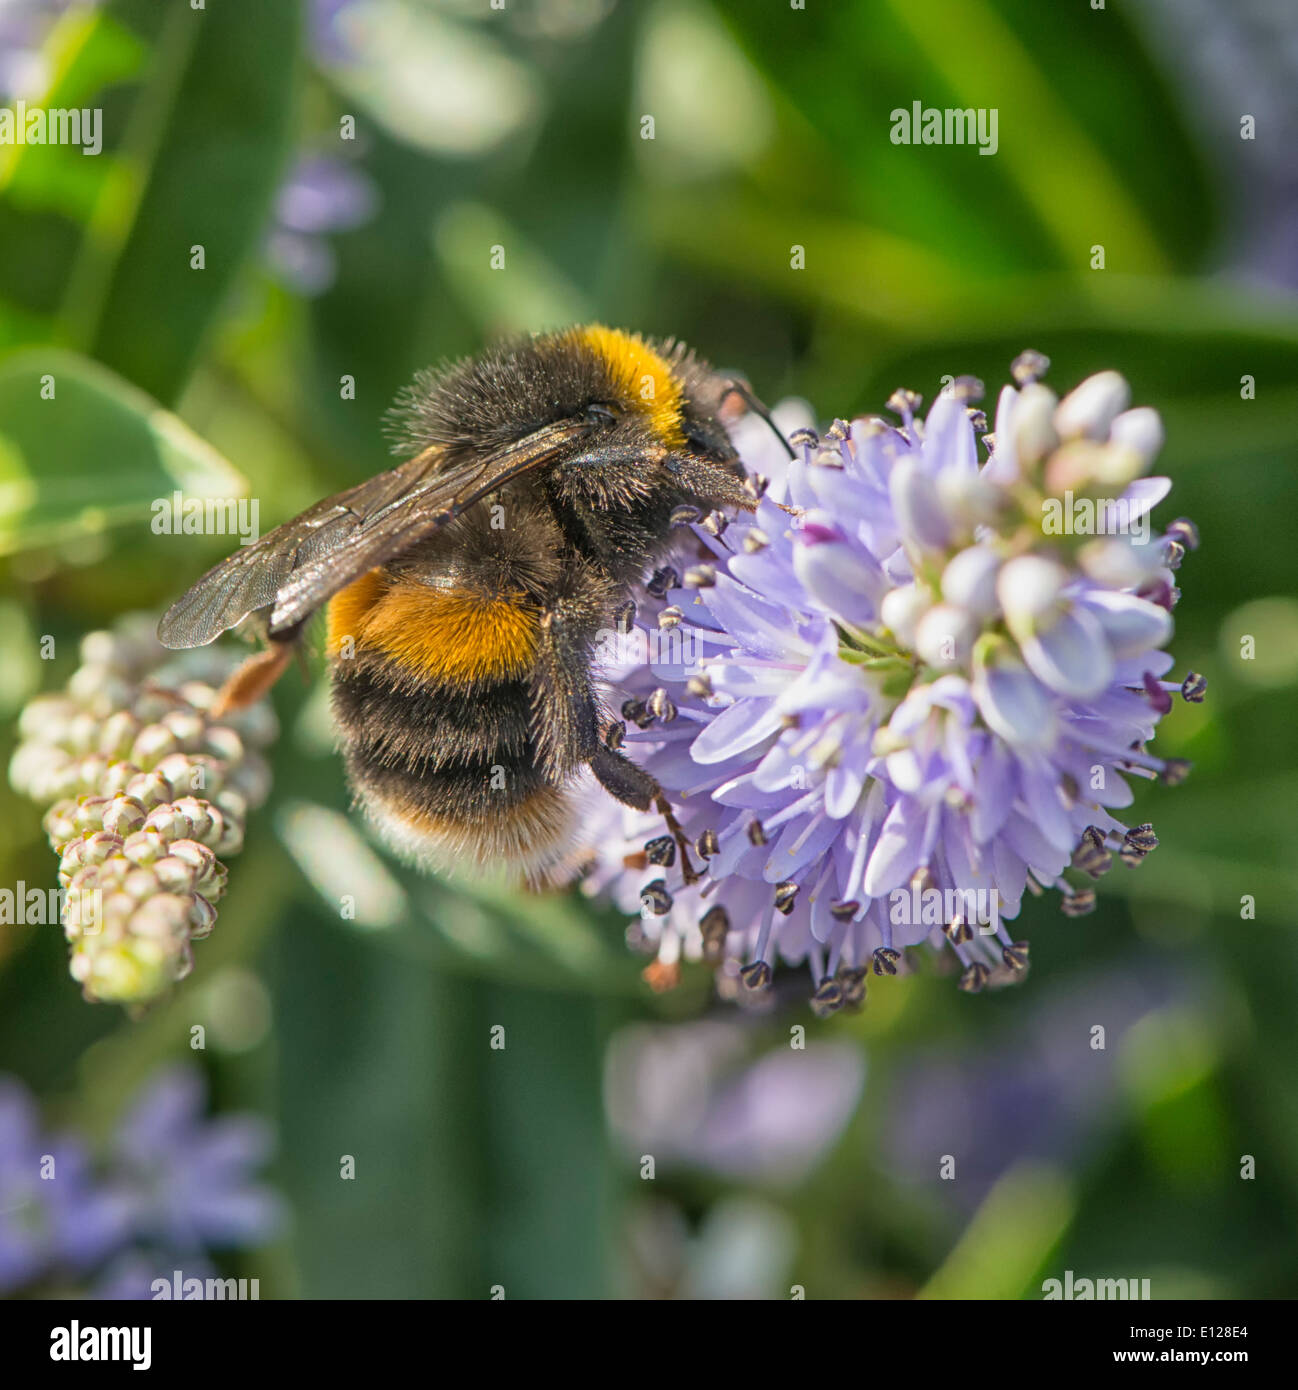 Bumble bee on flower Stock Photo